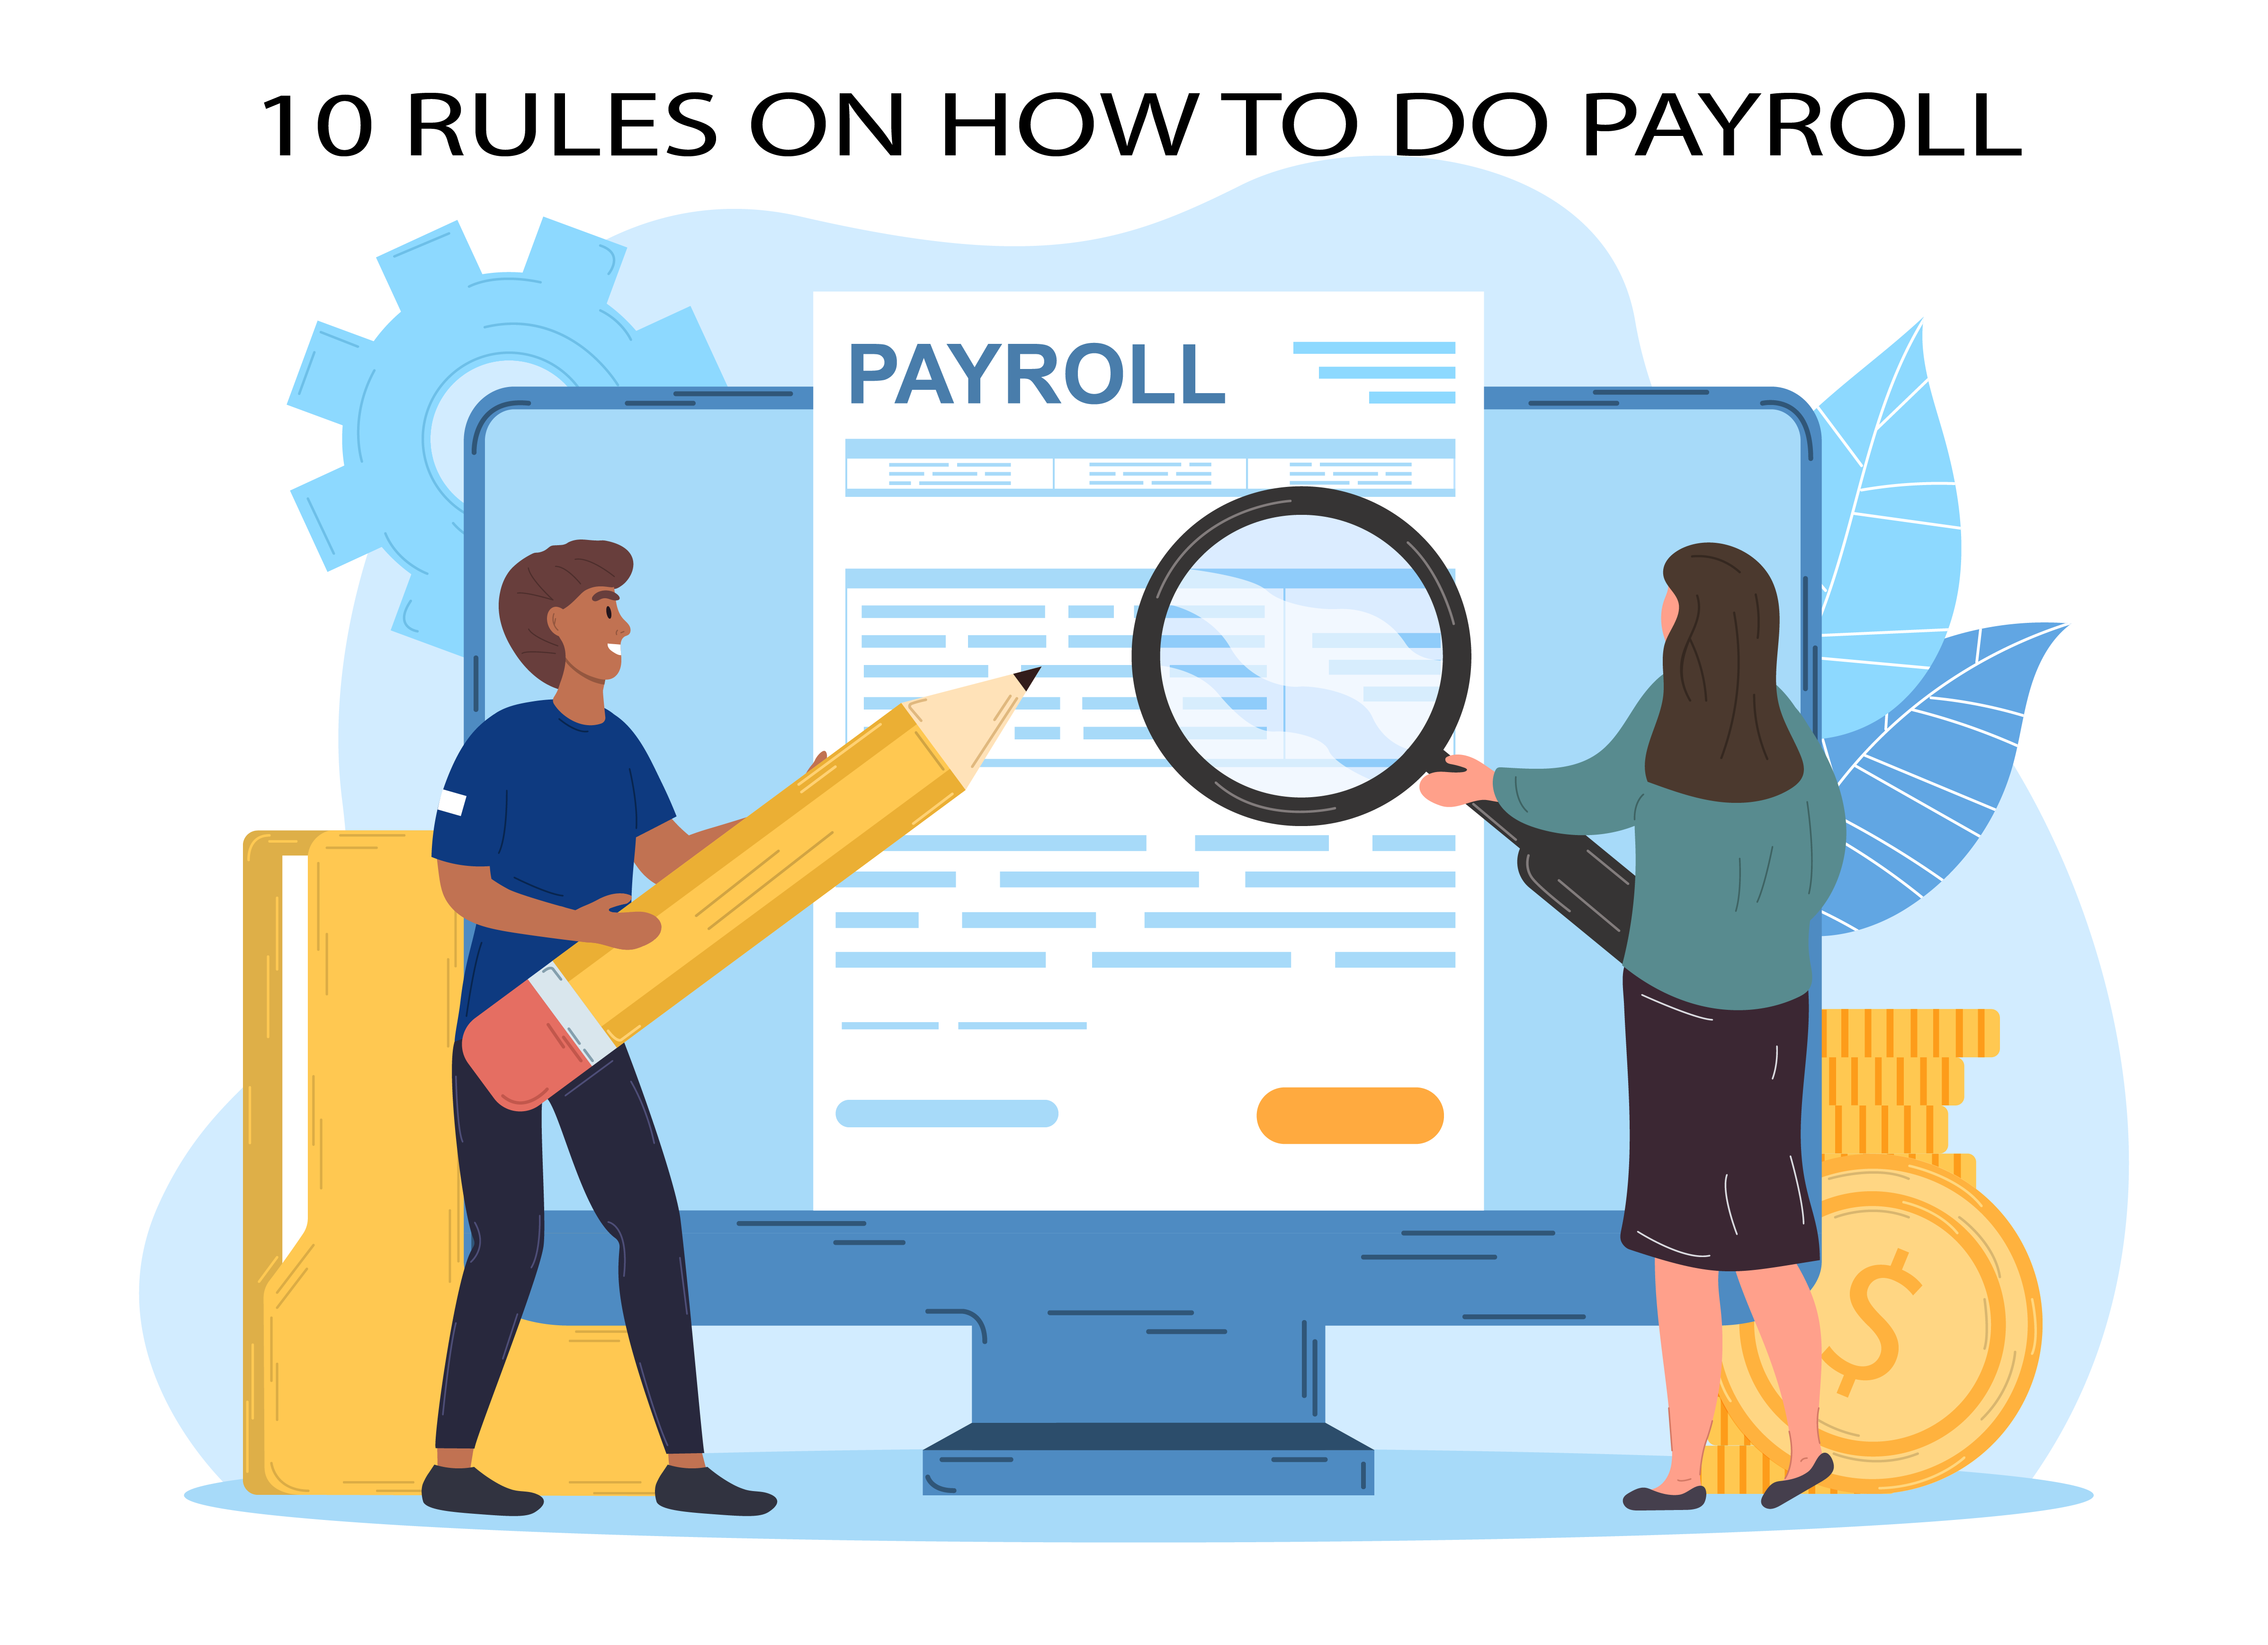 The ten rules on how to do Payroll